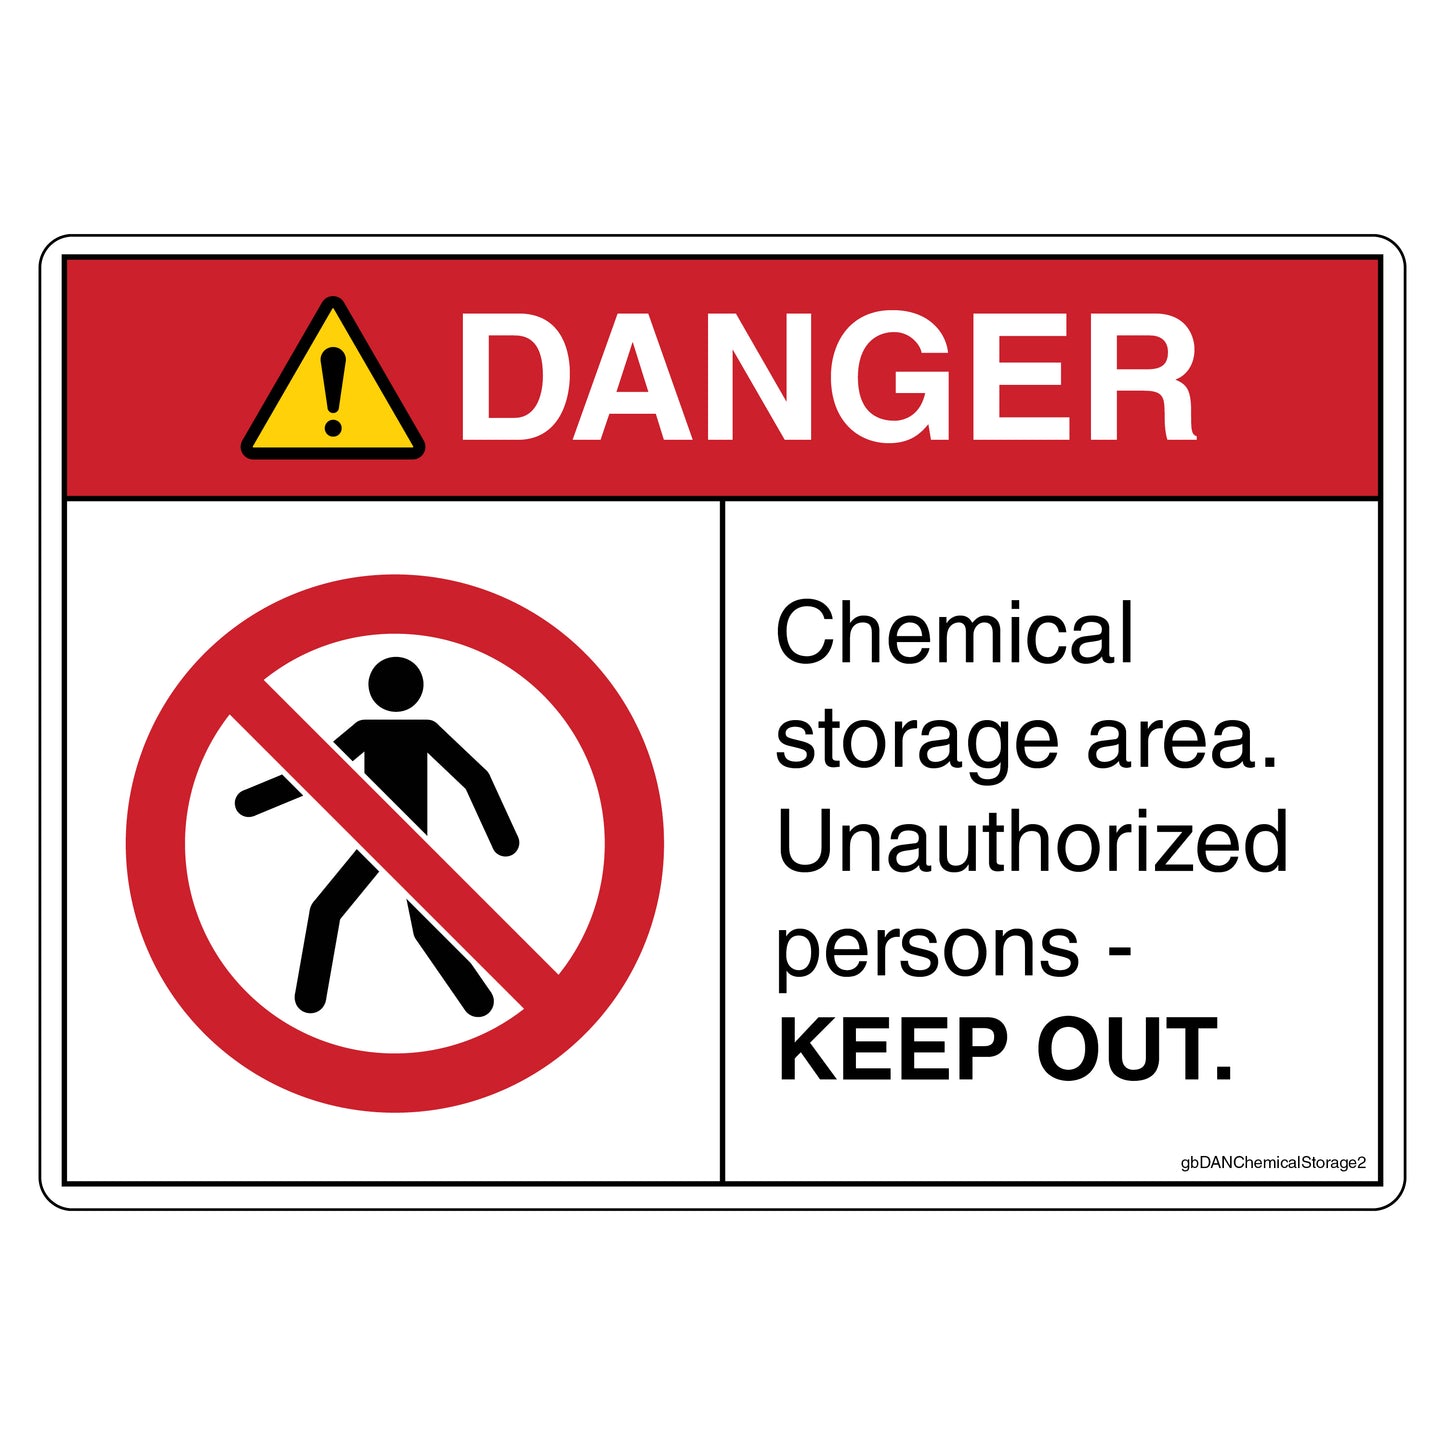 Danger Chemical Storage Area Unauthorized Persons Keep Out Decal.